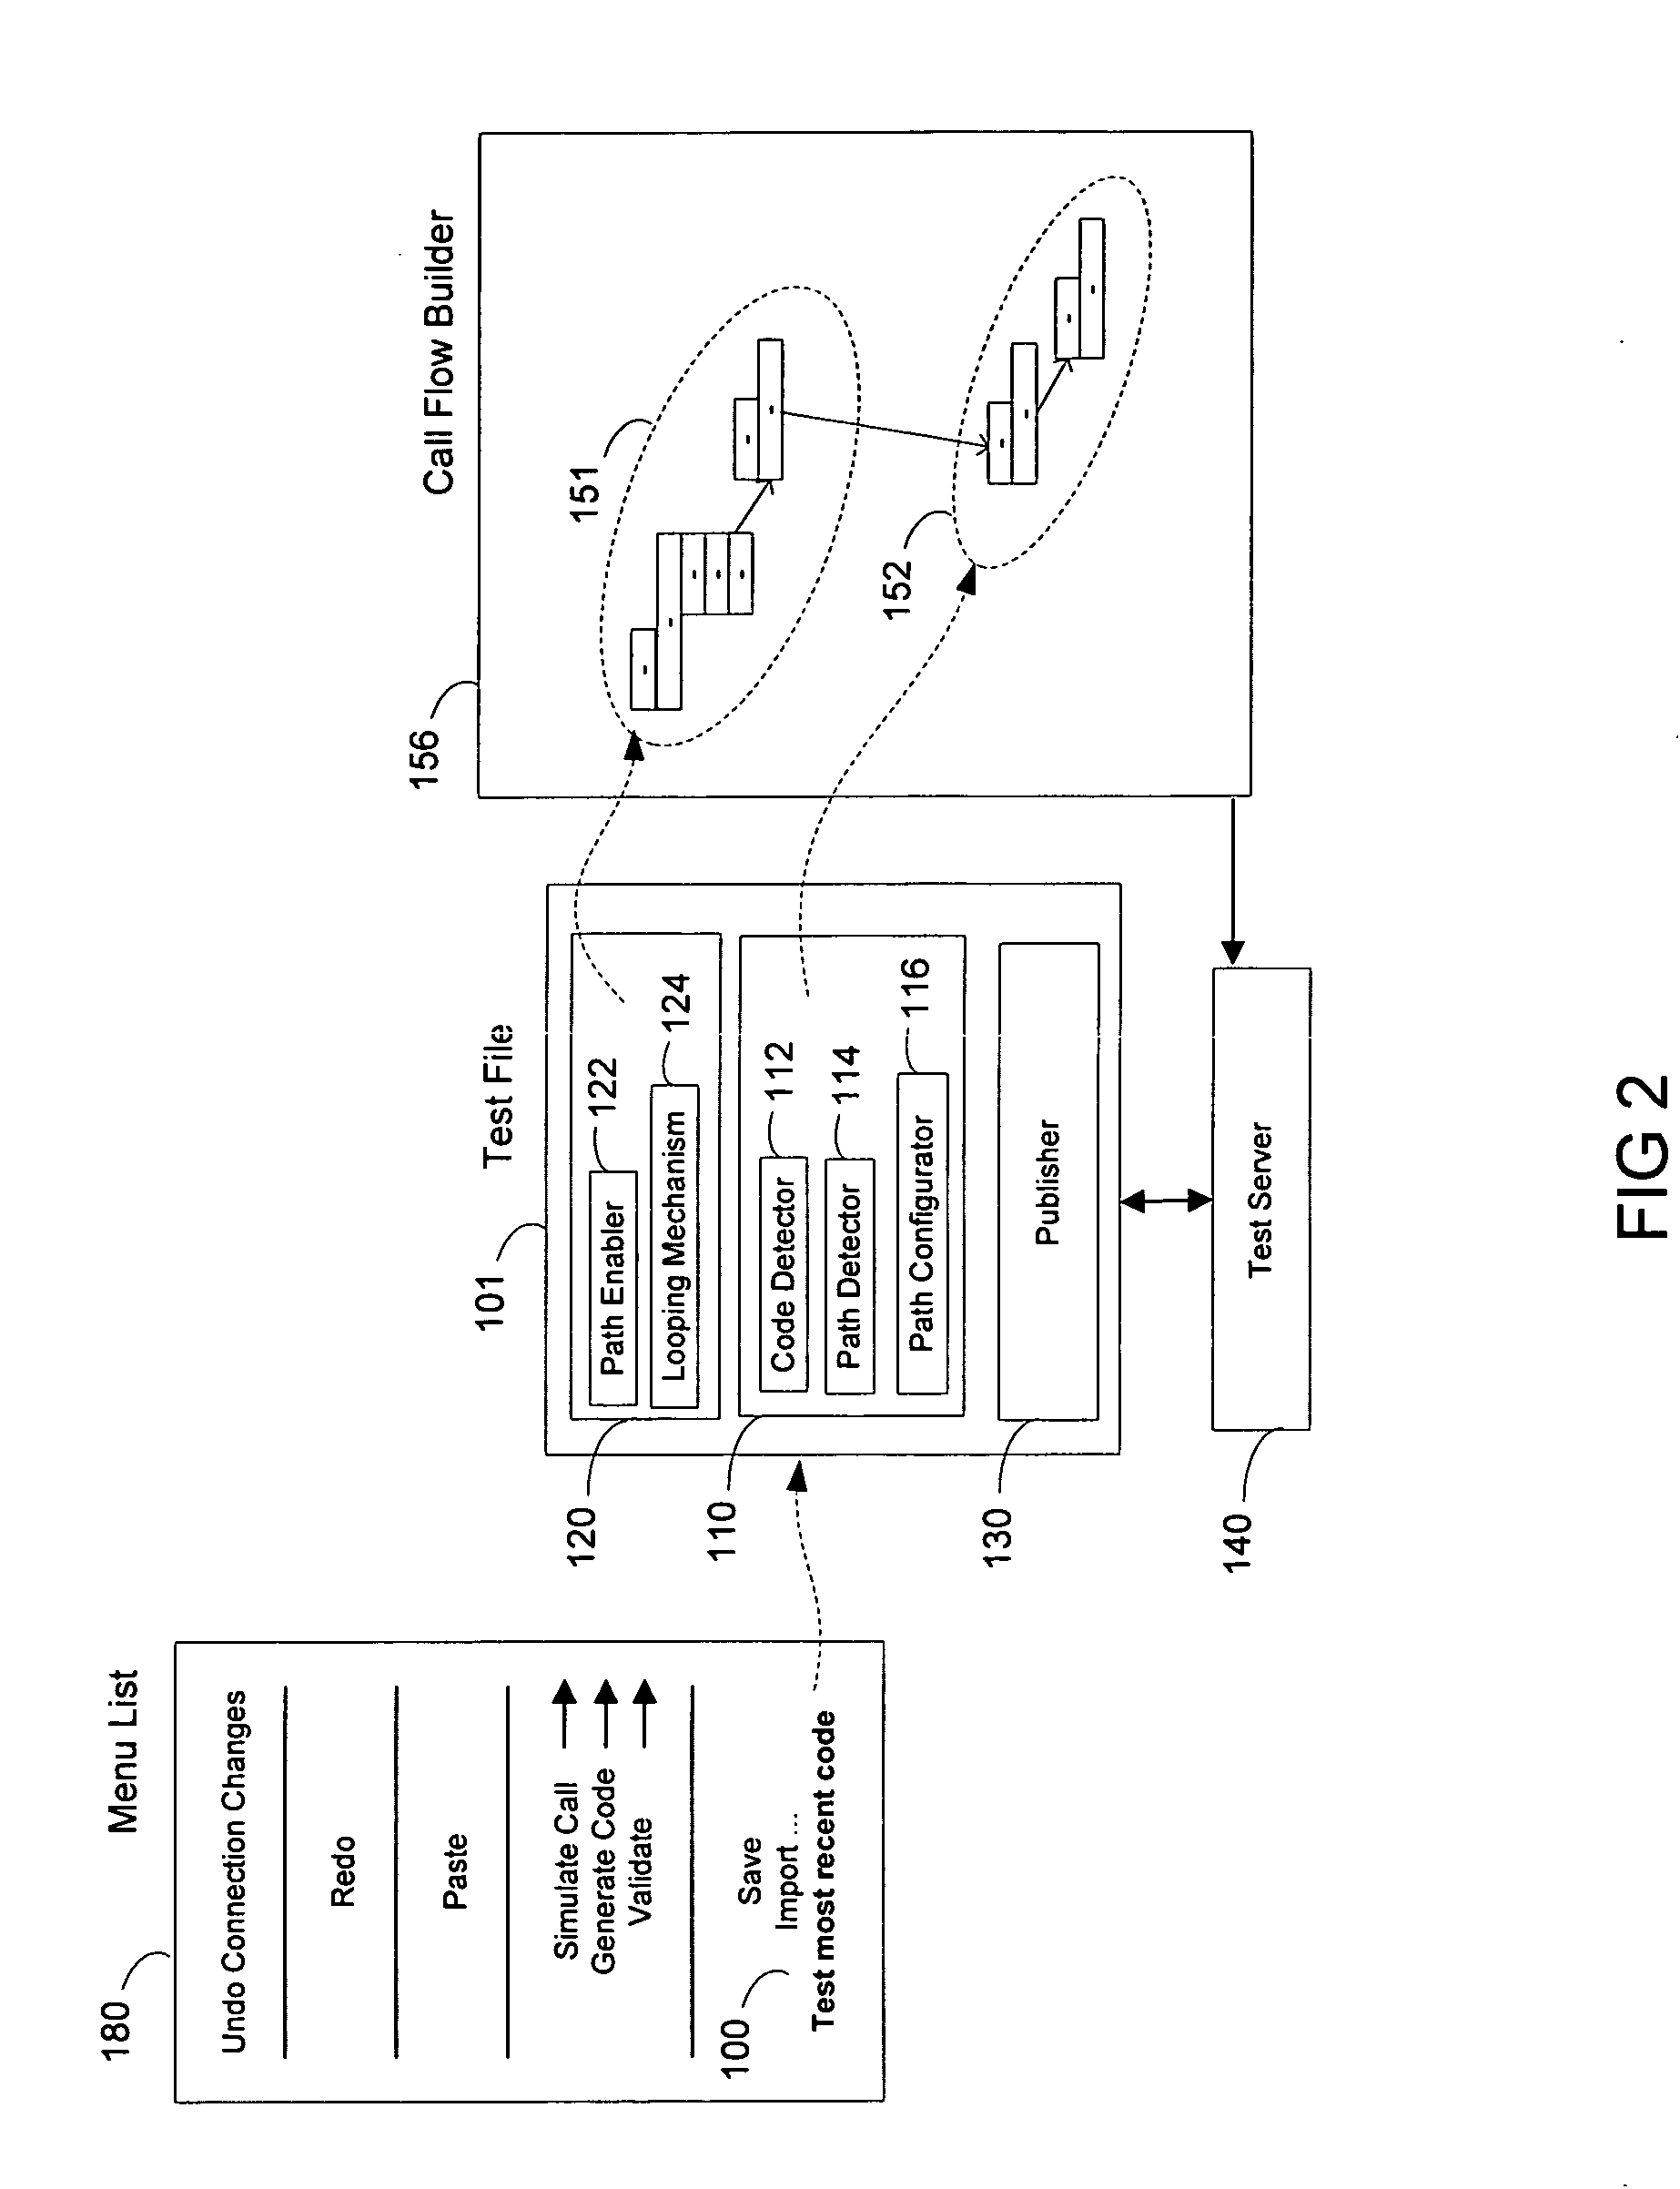 Method and system for testing sections of large speech applications